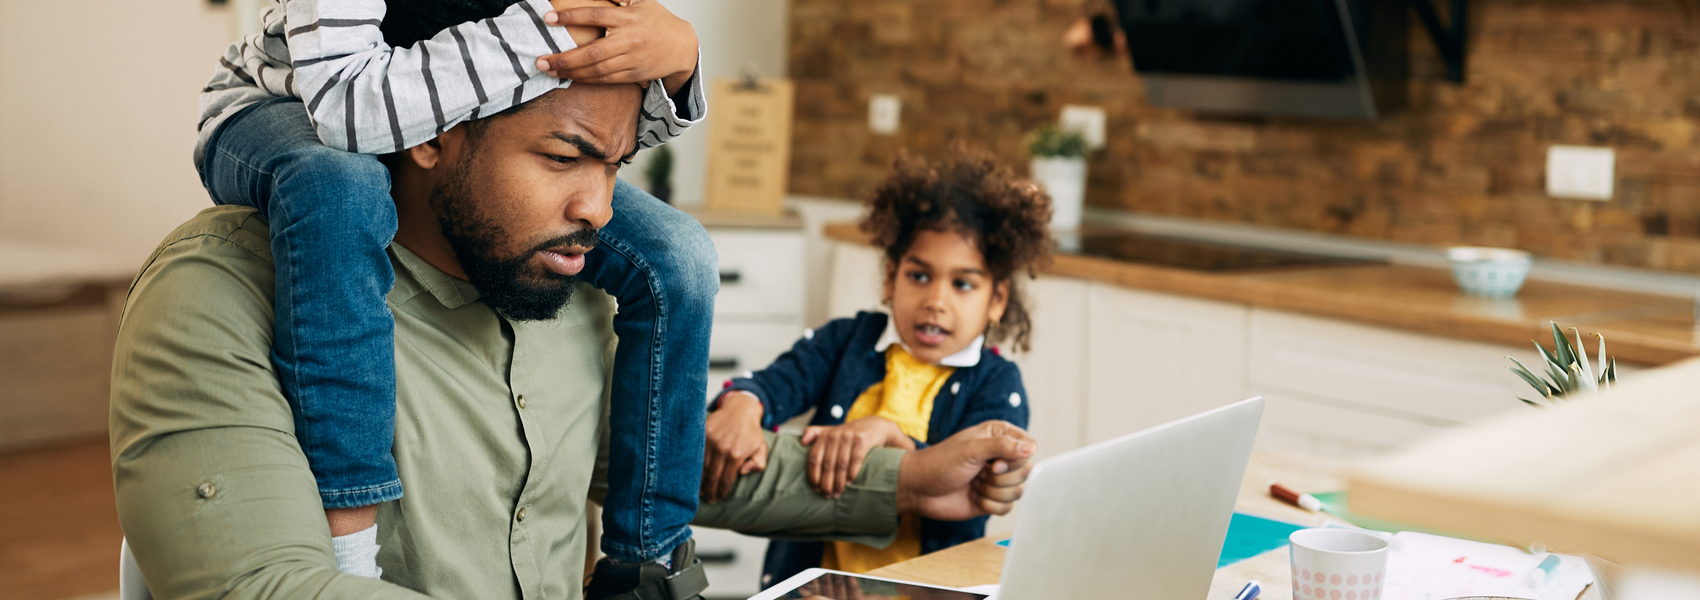 stressed Black foster dad searches for help on his laptop while kids tug on his arm